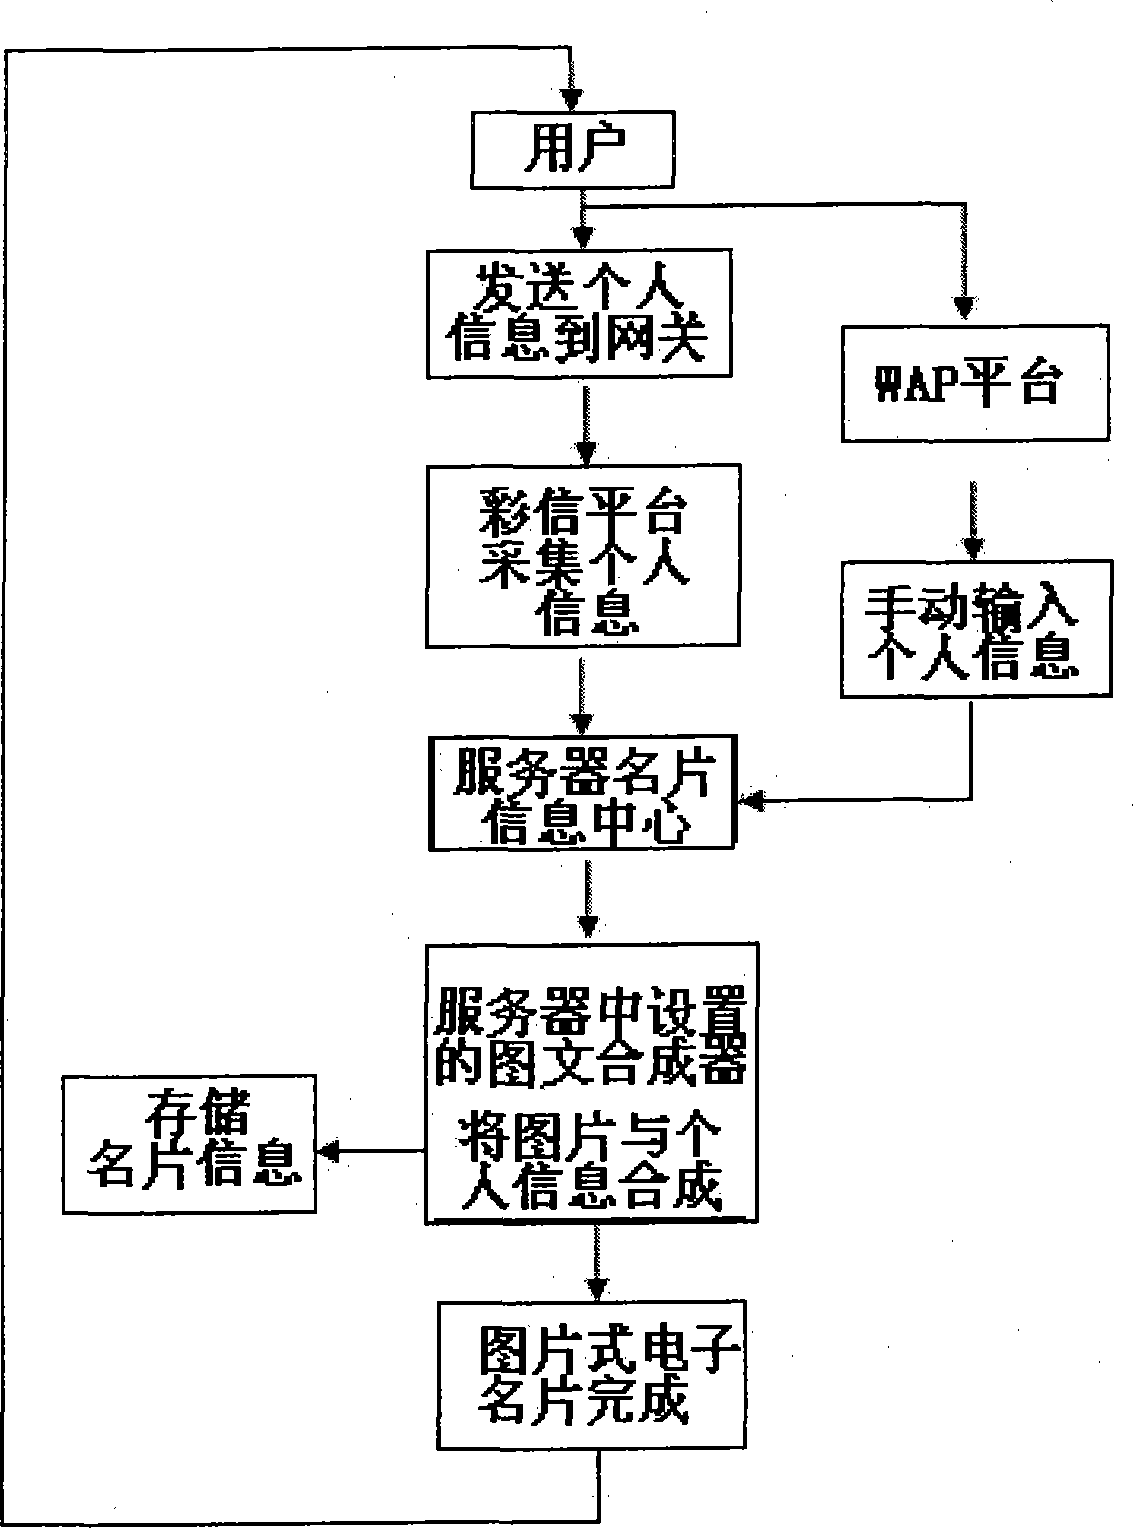 Method for implementing business card generation transmission by wireless communication GPRS or WAP technology